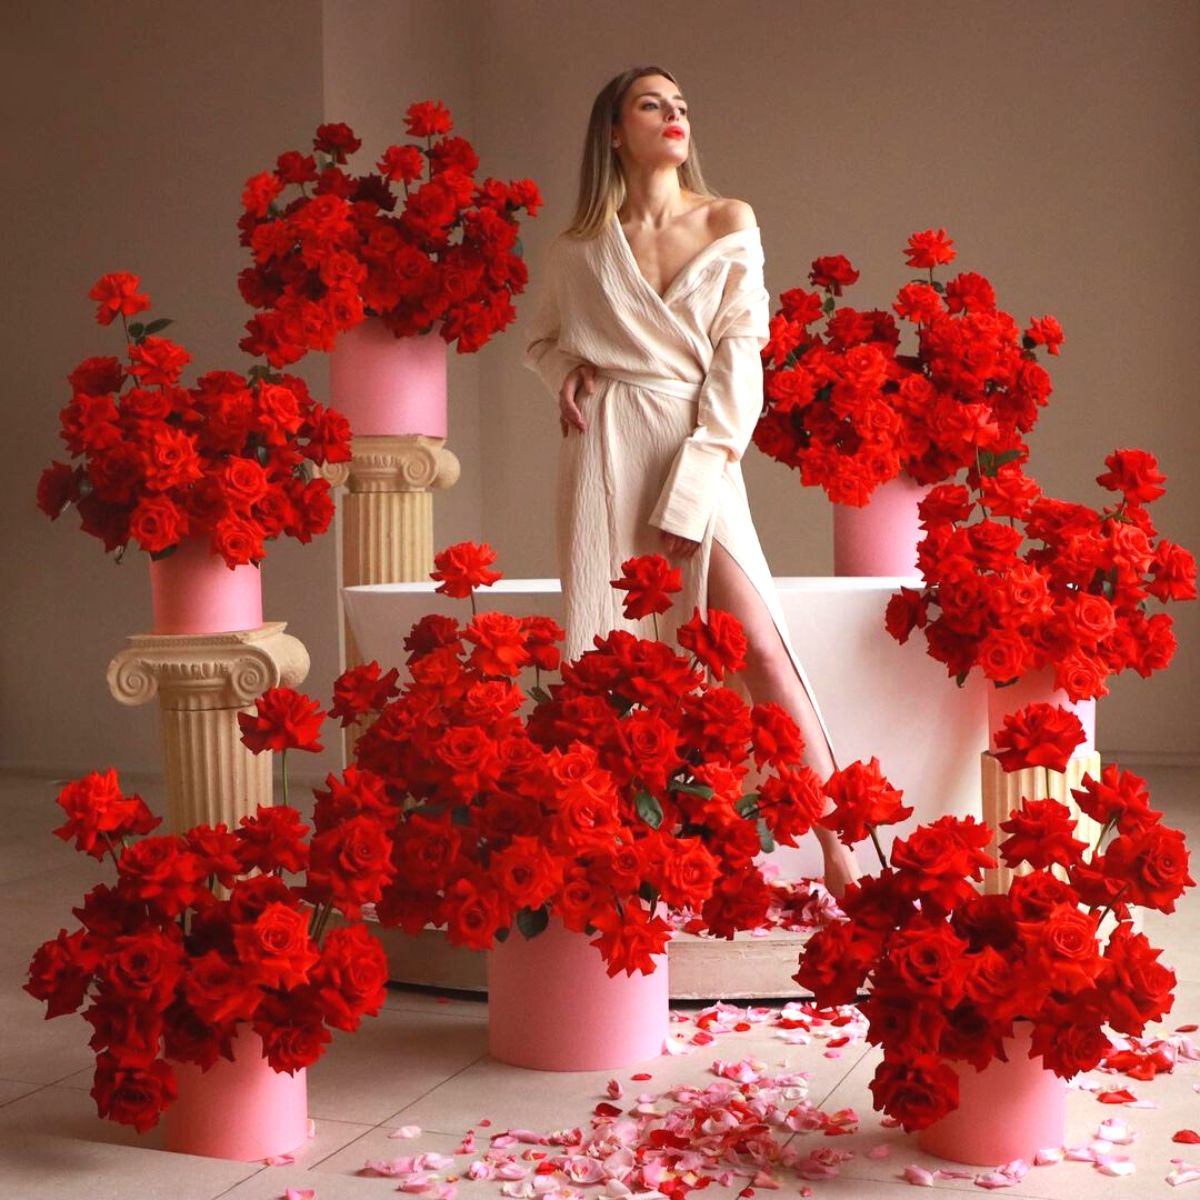 Uniquely crafted Valentines Day arrangements and decor by Lacy Bird